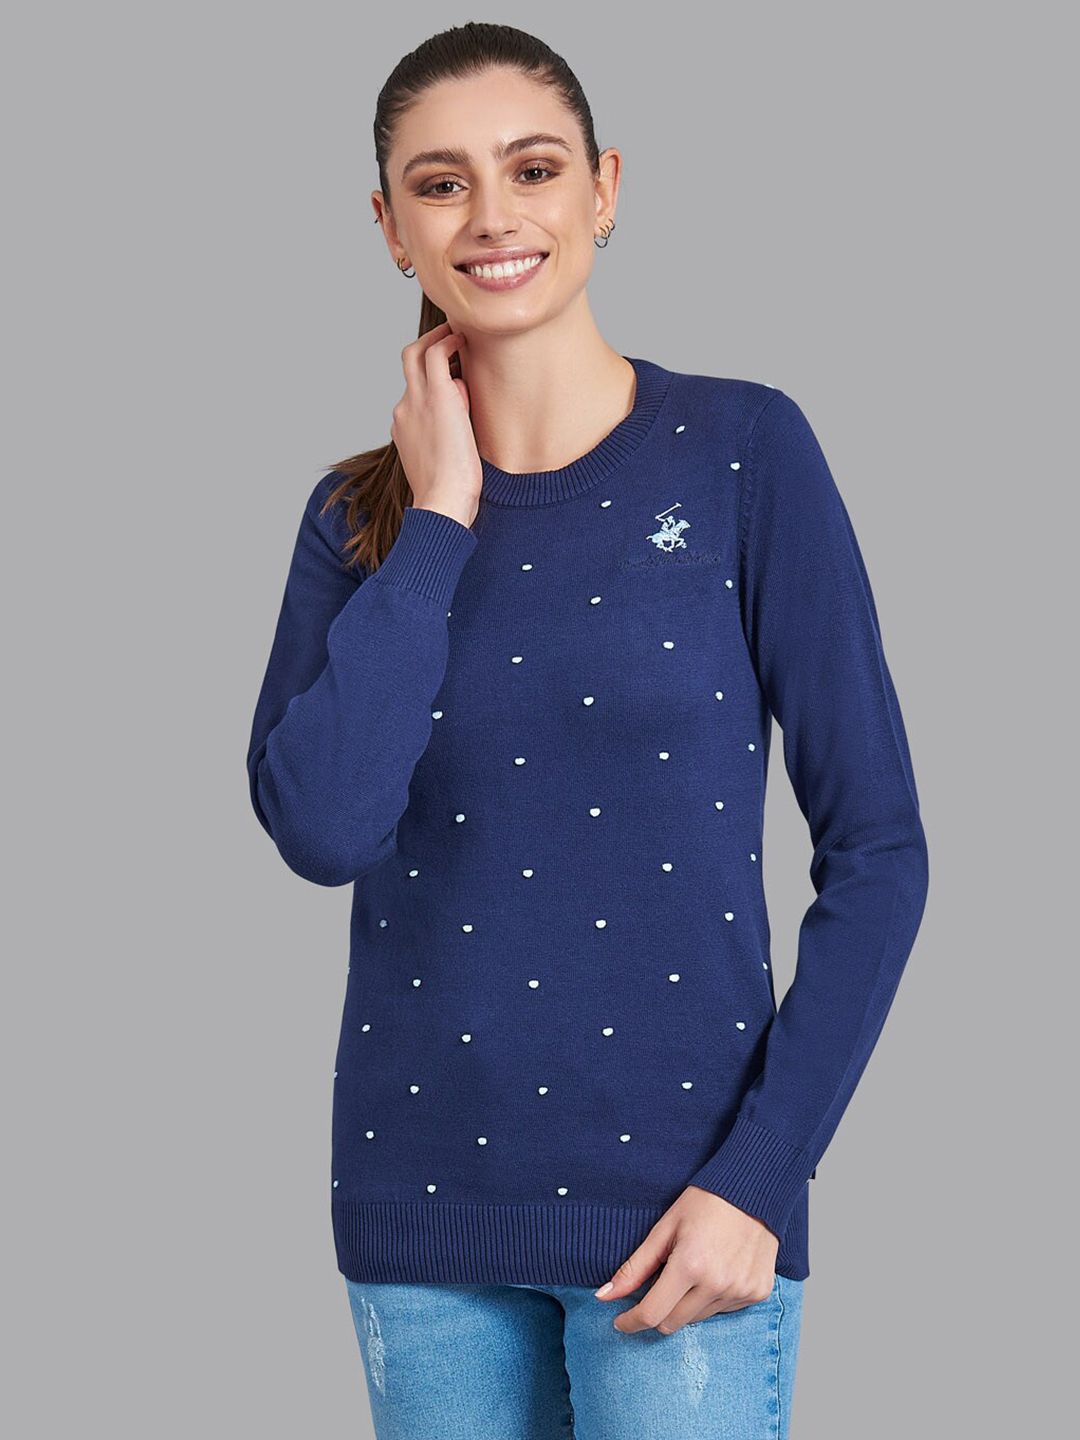 Beverly Hills Polo Club Women Navy Blue & White Polka Dots Printed Pullover Price in India